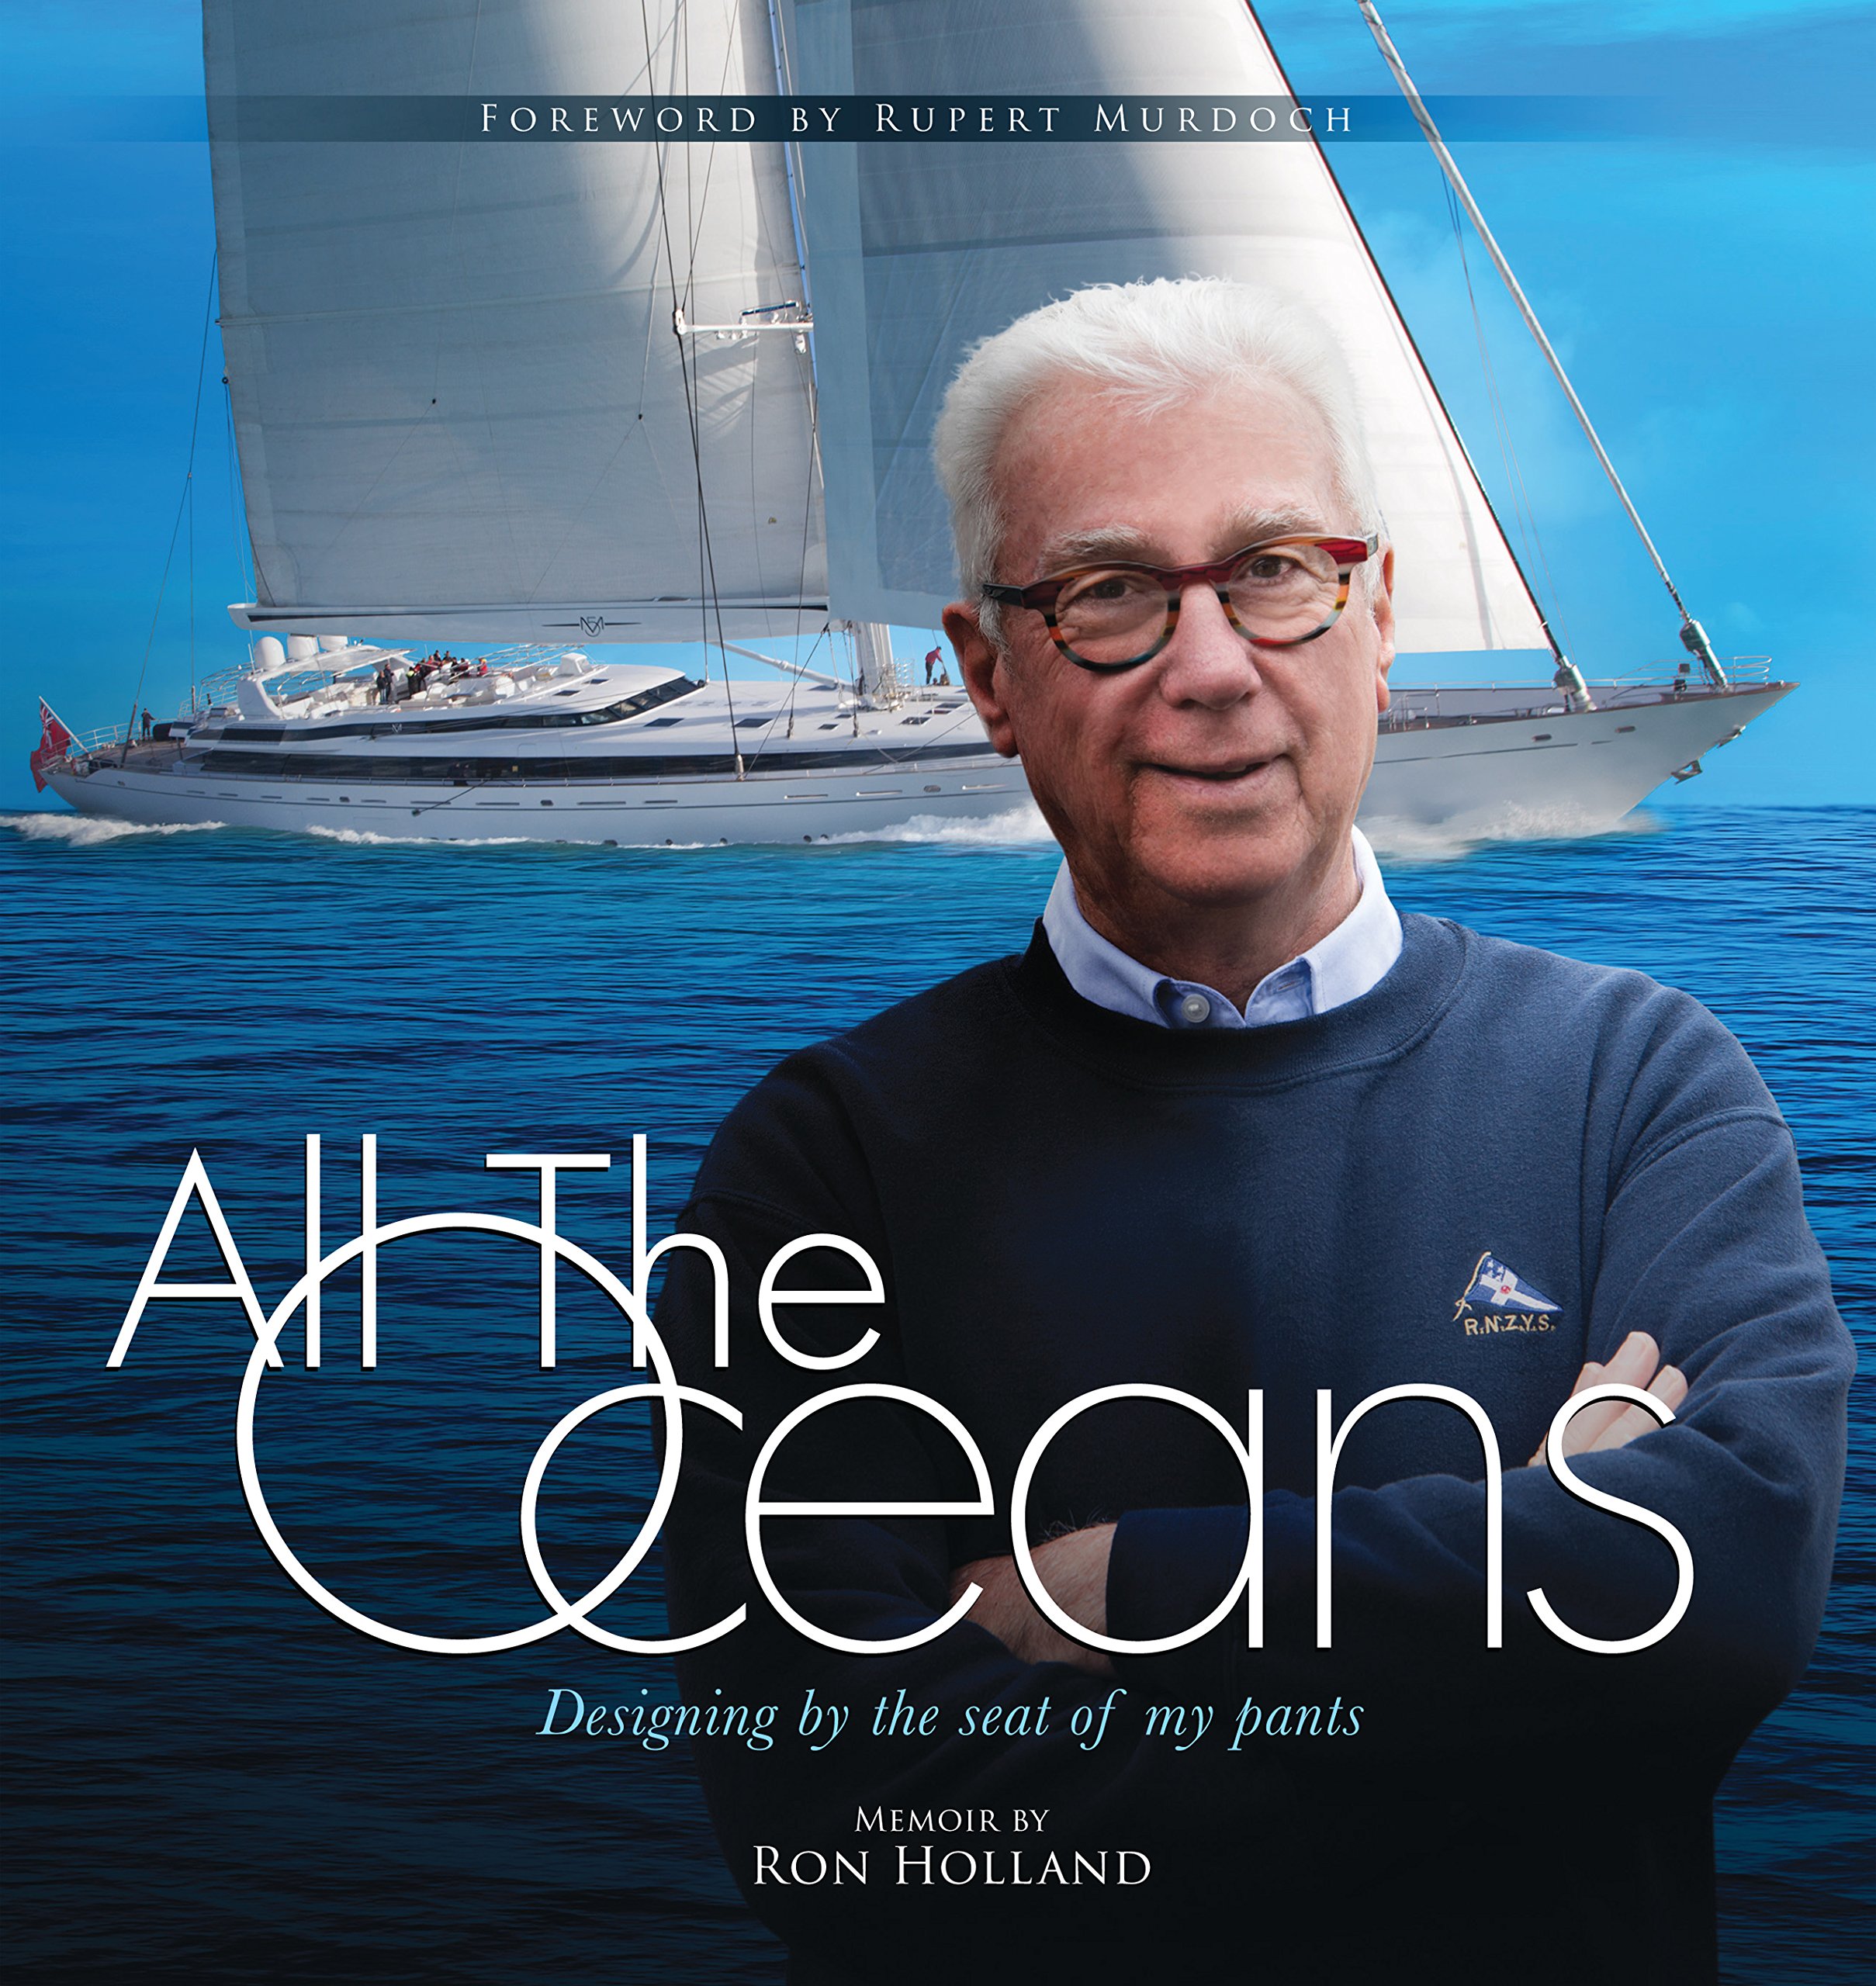 All the oceans - designing by the seat of my pants